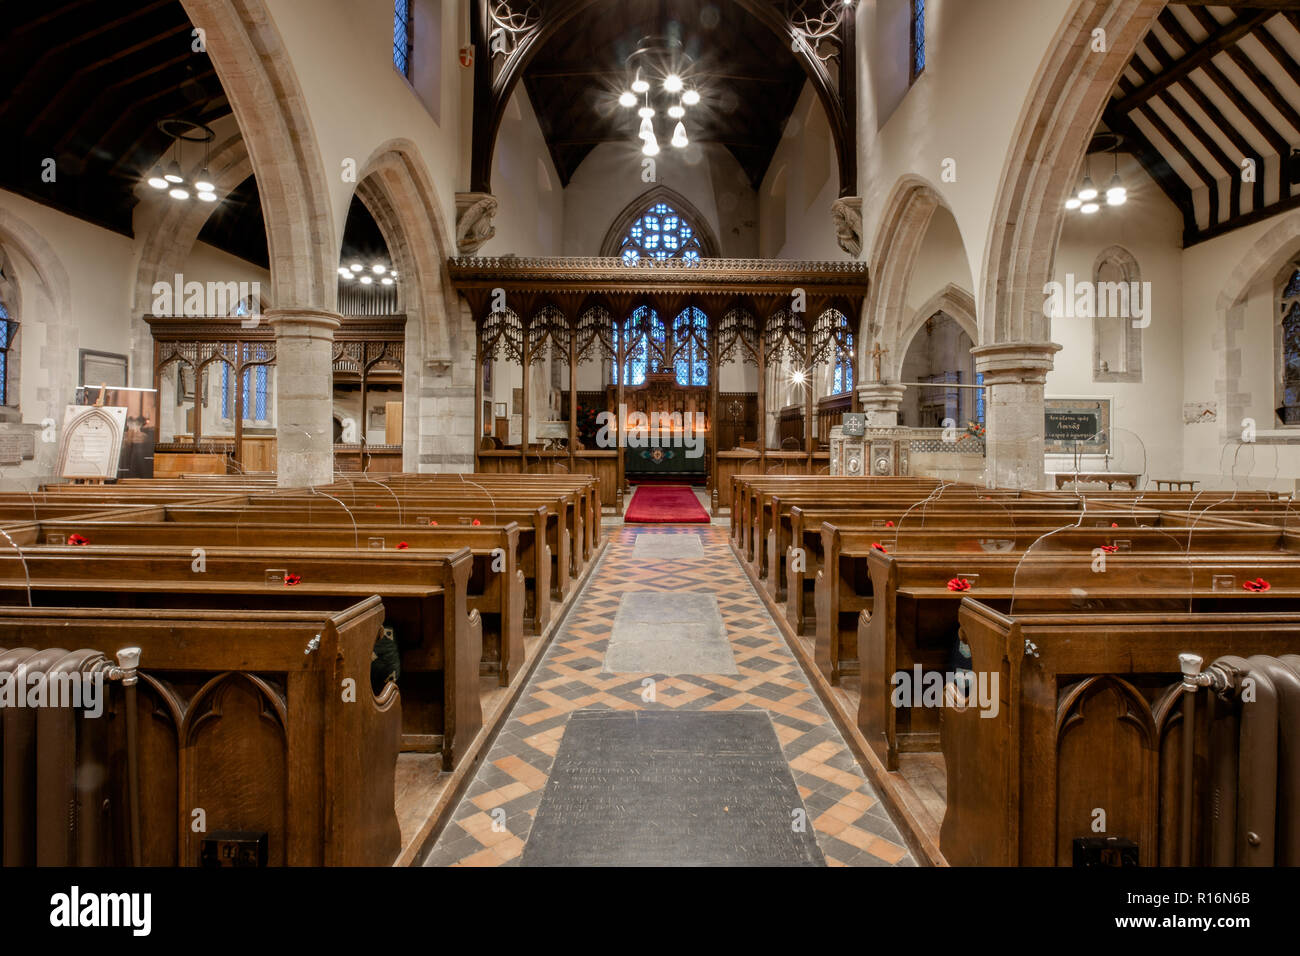 Penshurst, UK. 9th November 2018. There but not there, an installation of 50 silhouettes of fallen soldiers from the first world war at St John the Baptist, Penshurst, Kent. Designed by Martin Barraud and an initiative which originated in THIS church but now spread nationwide This is the  2018 installation to mark the centenary of Armistice commemoration  to mark the fallen Tommy soldiers Credit: Sarah Mott/Alamy Live News Stock Photo